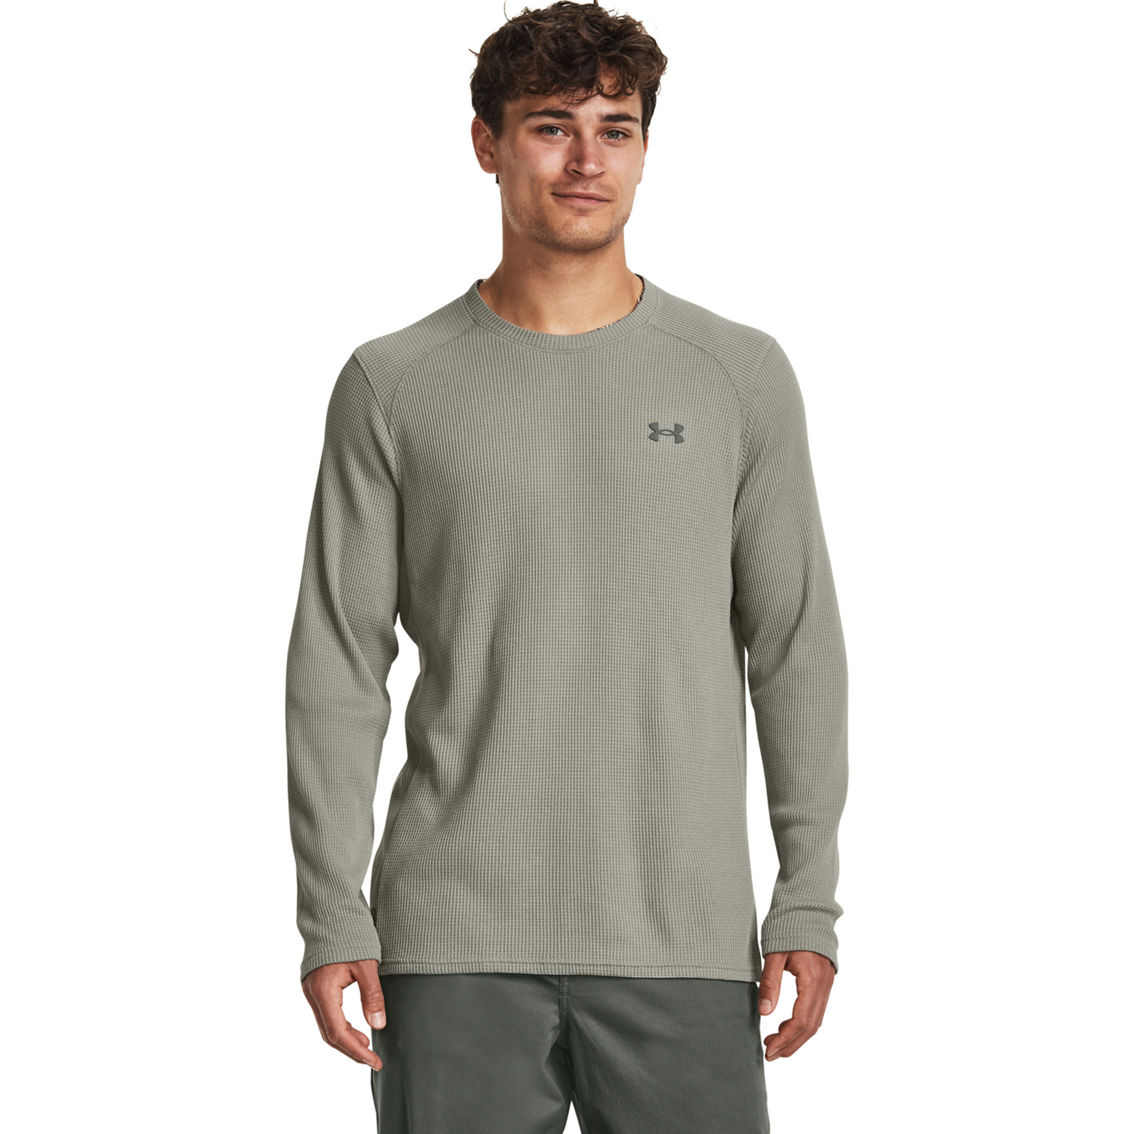 Under Armour Waffle Knit Max Crew Sweater | Shirts | Clothing ...